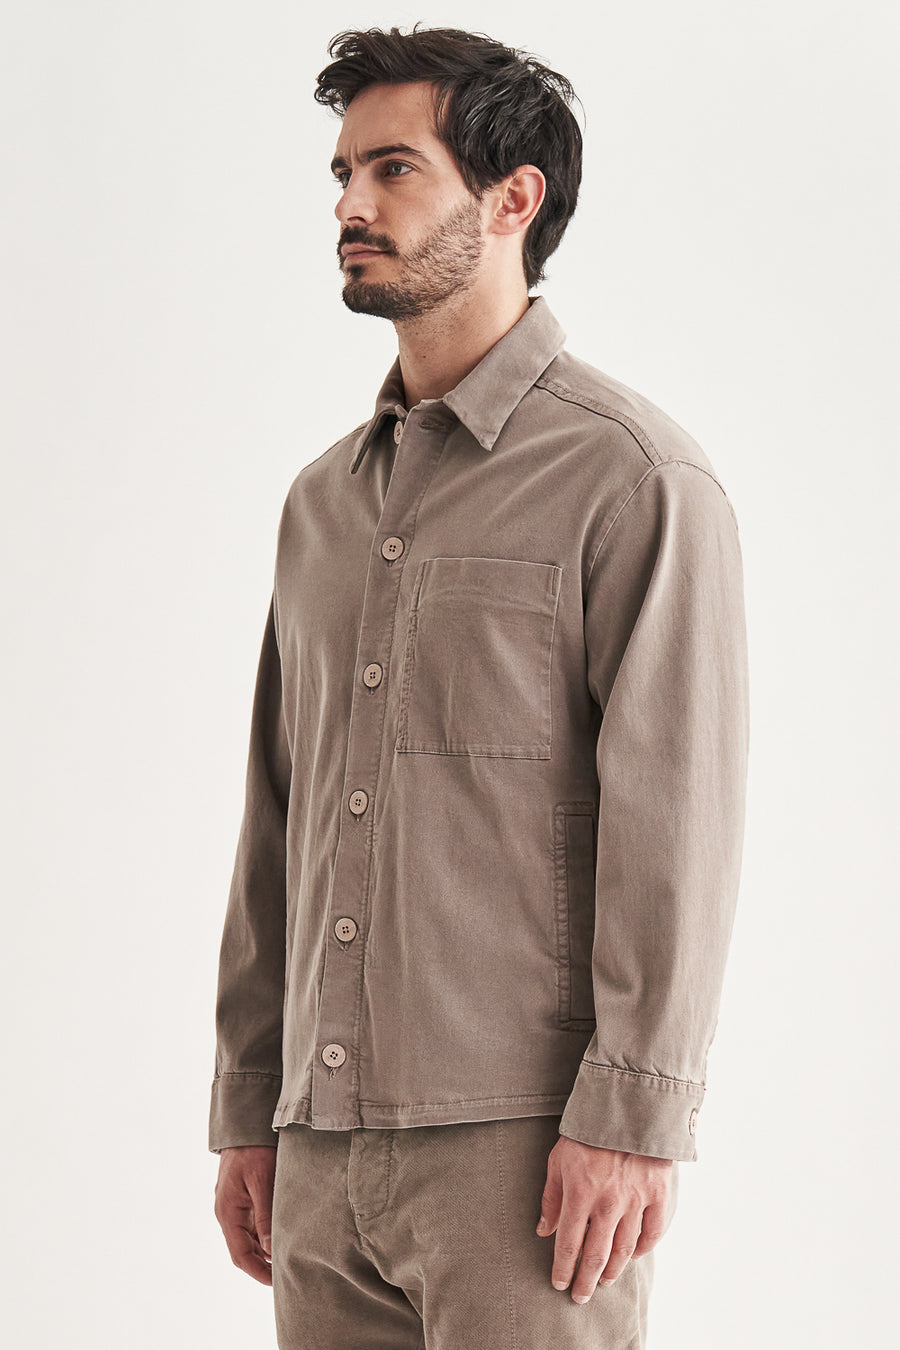 Buy the Transit Tencel/Modal Buttoned Overshirt in Beige at Intro. Spend £50 for free UK delivery. Official stockists. We ship worldwide.